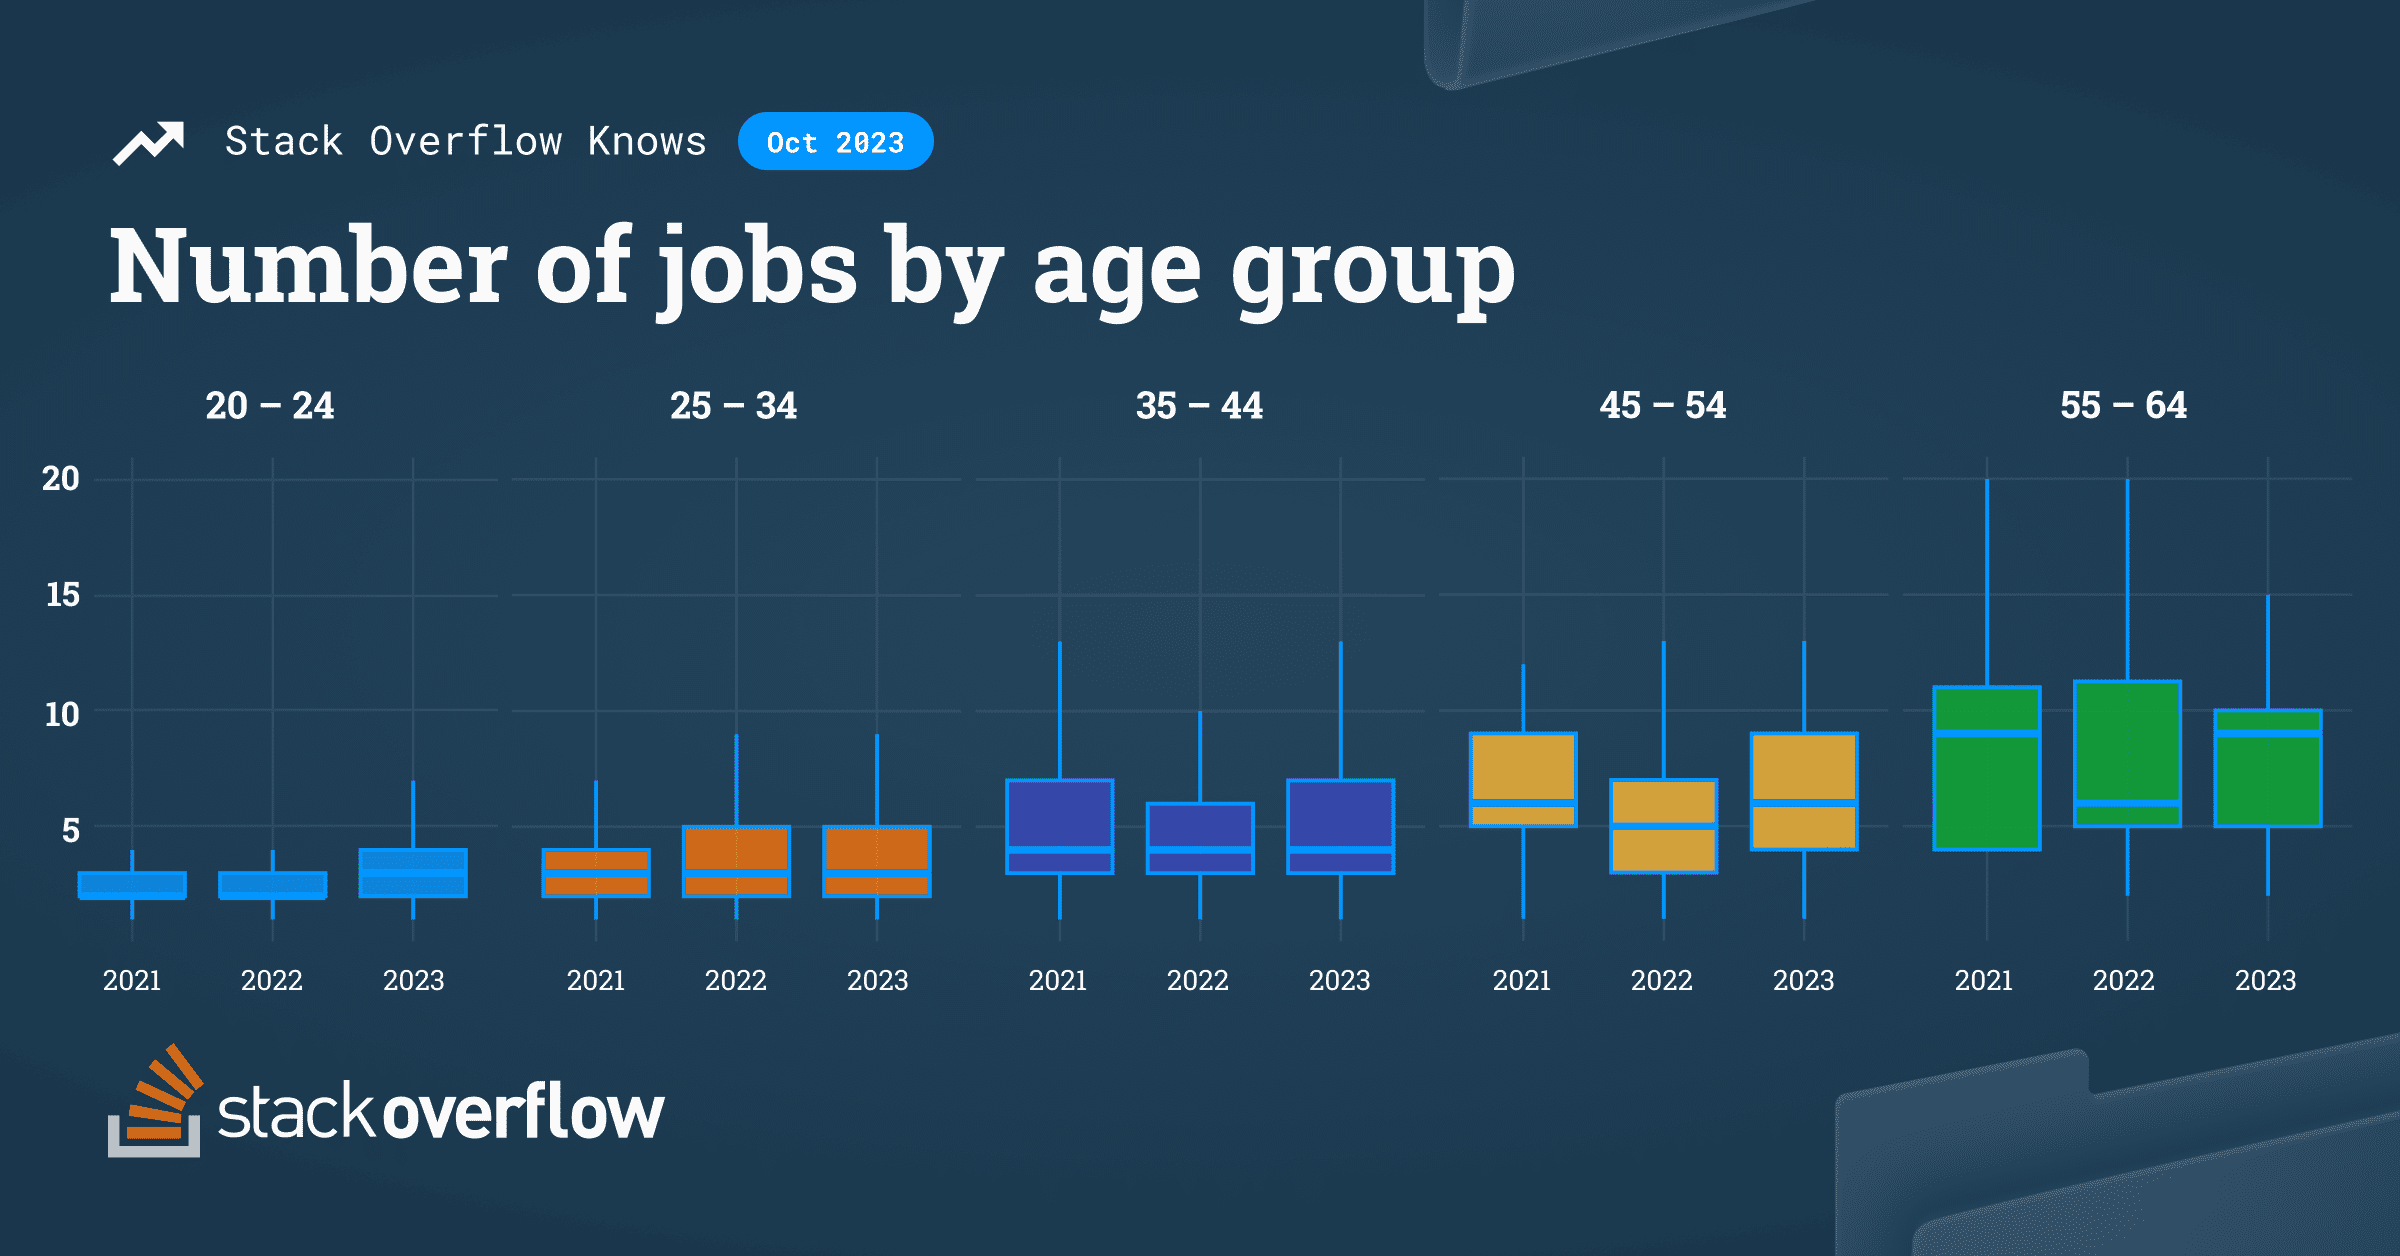 Jobs held by respondents in different age groups show median and quartile range for each in the past three years.